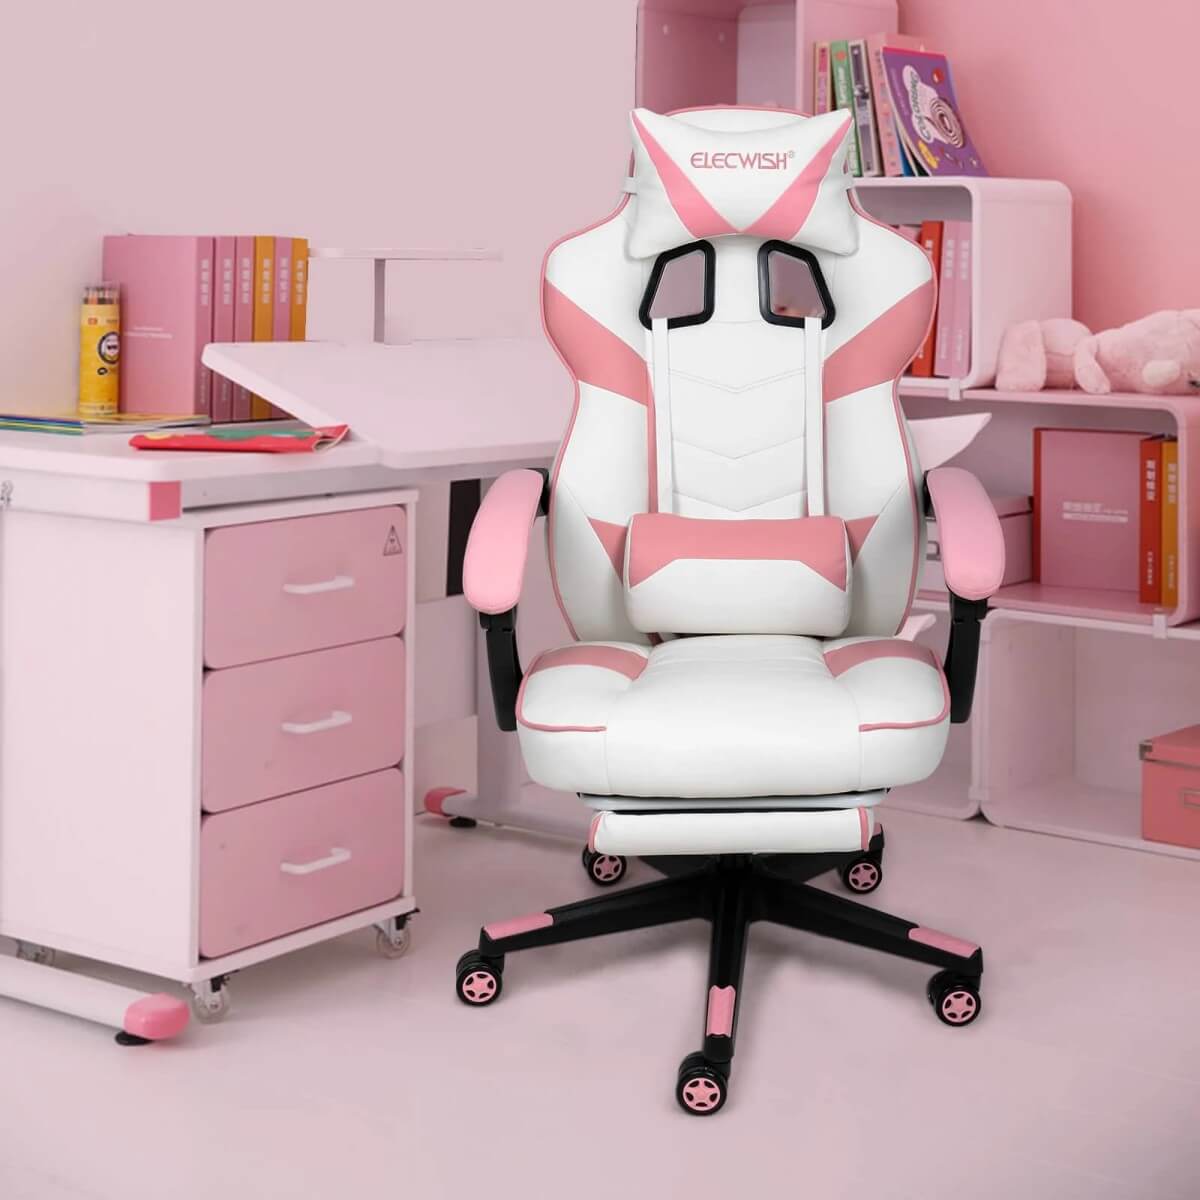 Elecwish Video Game Chairs Pink Gaming Chair With Footrest OC087 displays in the office room